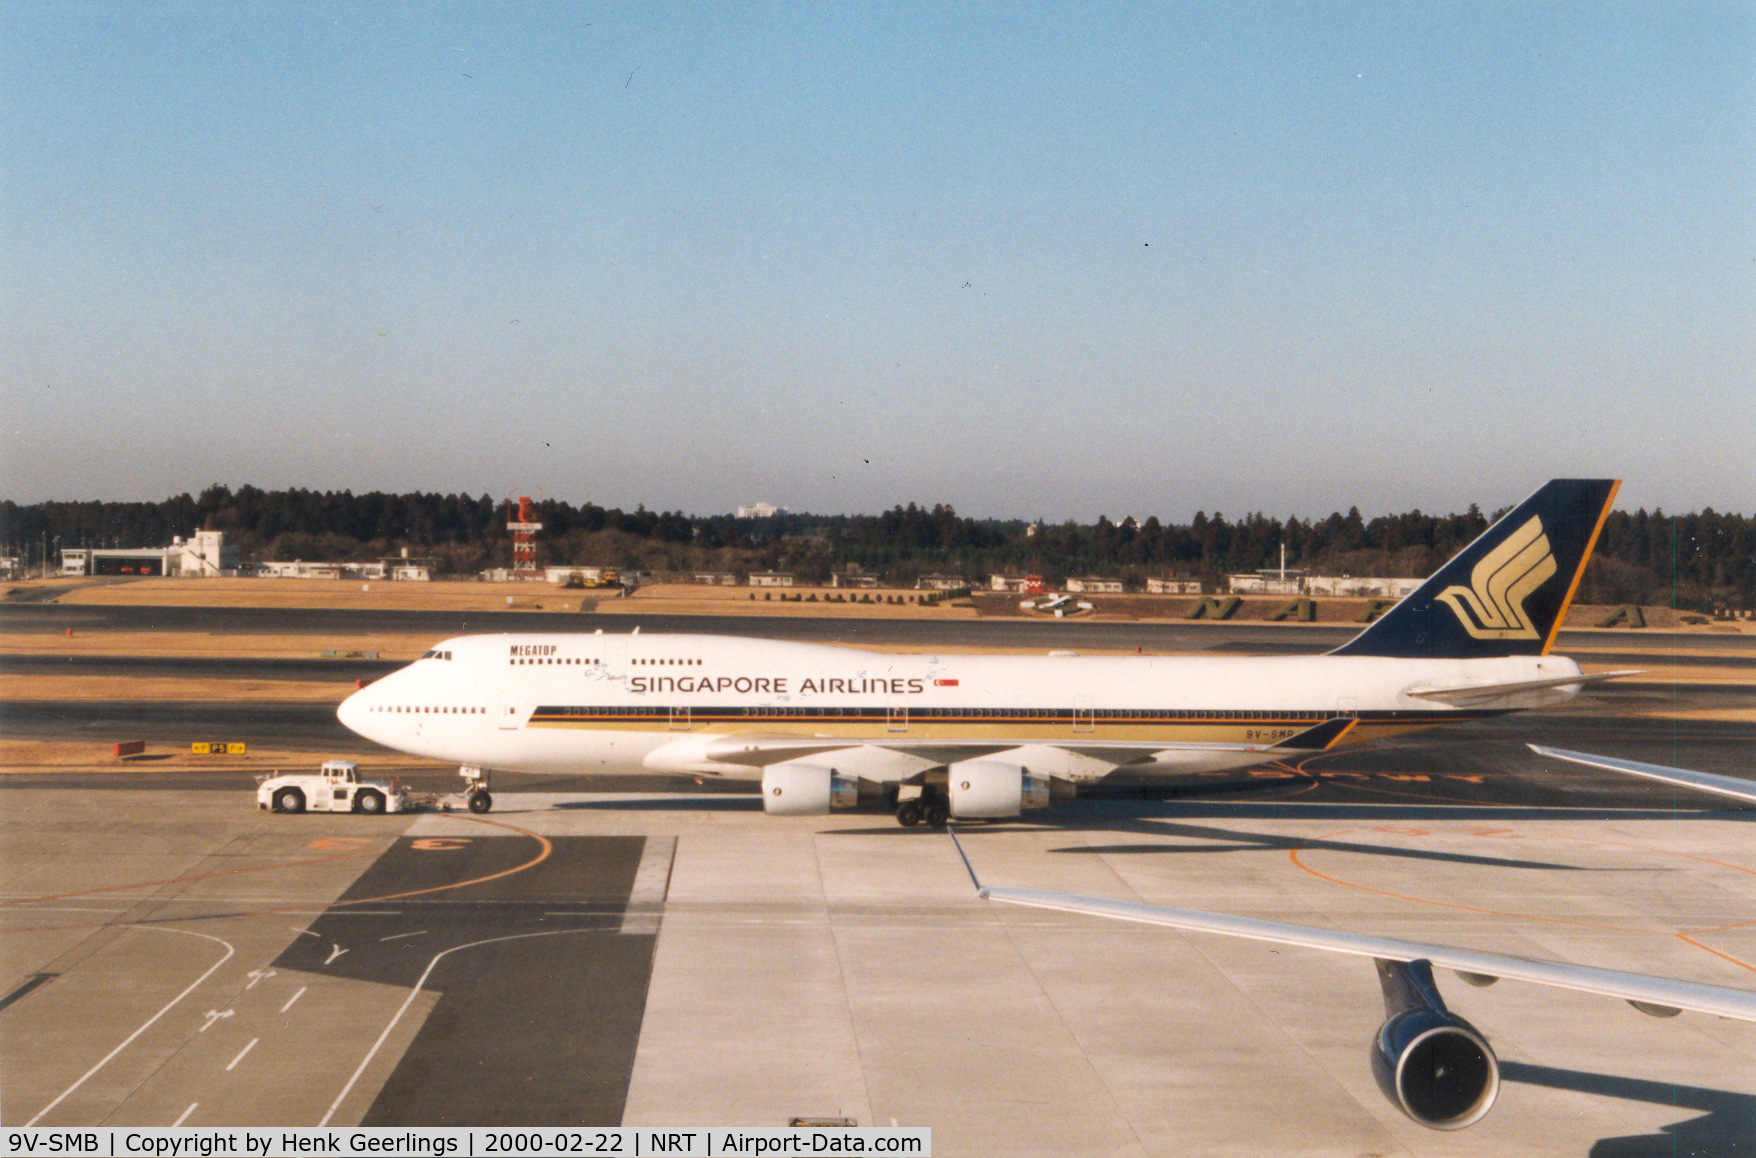 9V-SMB, 1988 Boeing 747-412 C/N 24062, Singapore Airlines